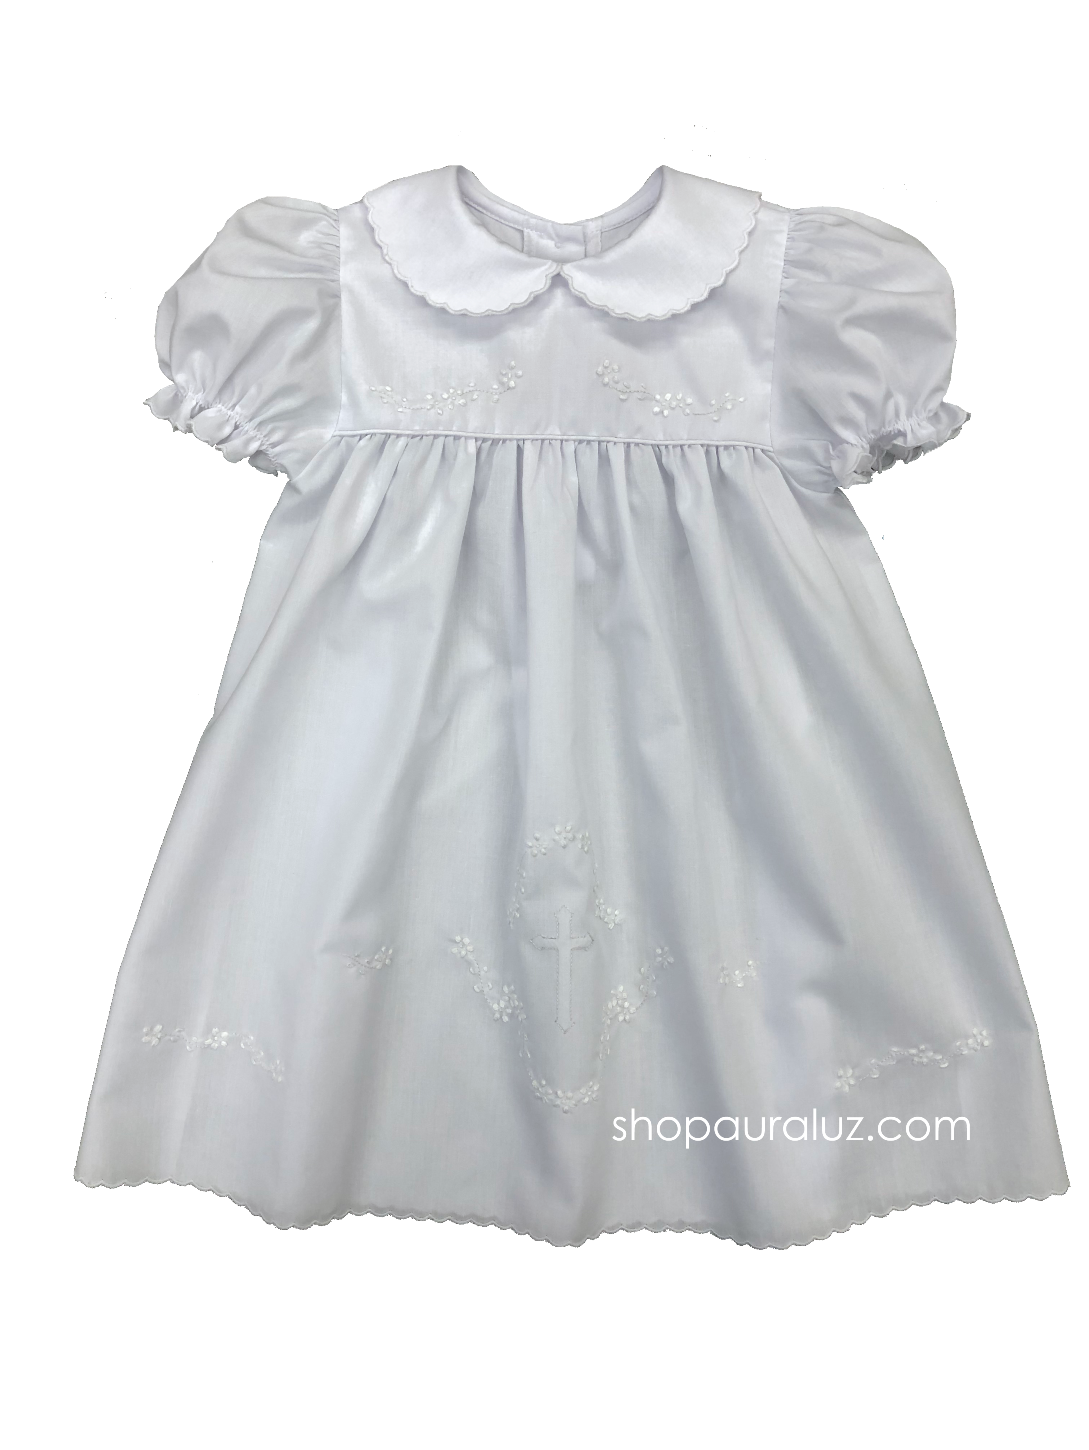 Auraluz Dress...White with white scallop trim, p.p.collar and embroidered cross